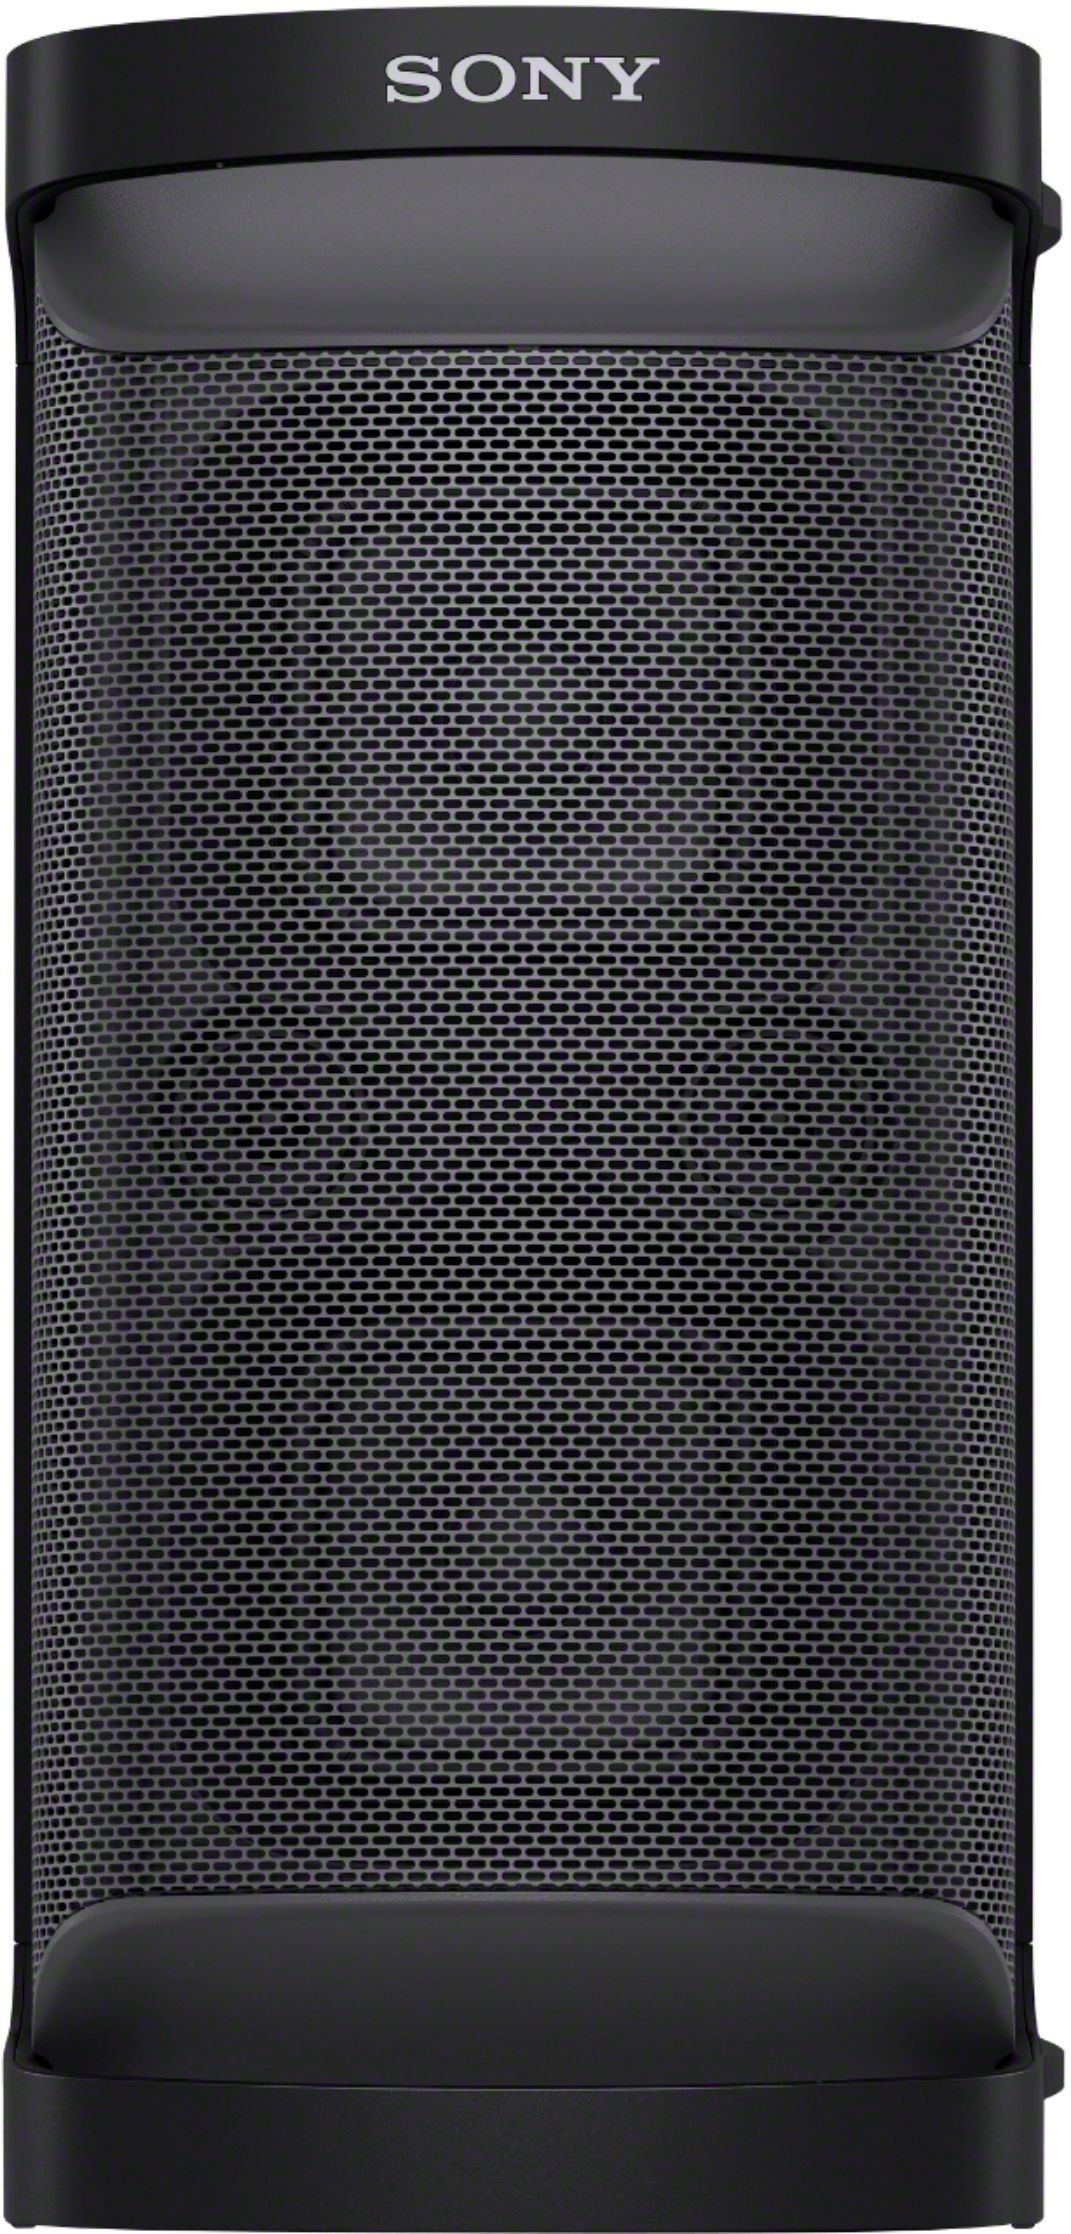 Party Bluetooth Speaker Water - with Black Best Buy XP500 Sony Portable Resistance SRSXP500